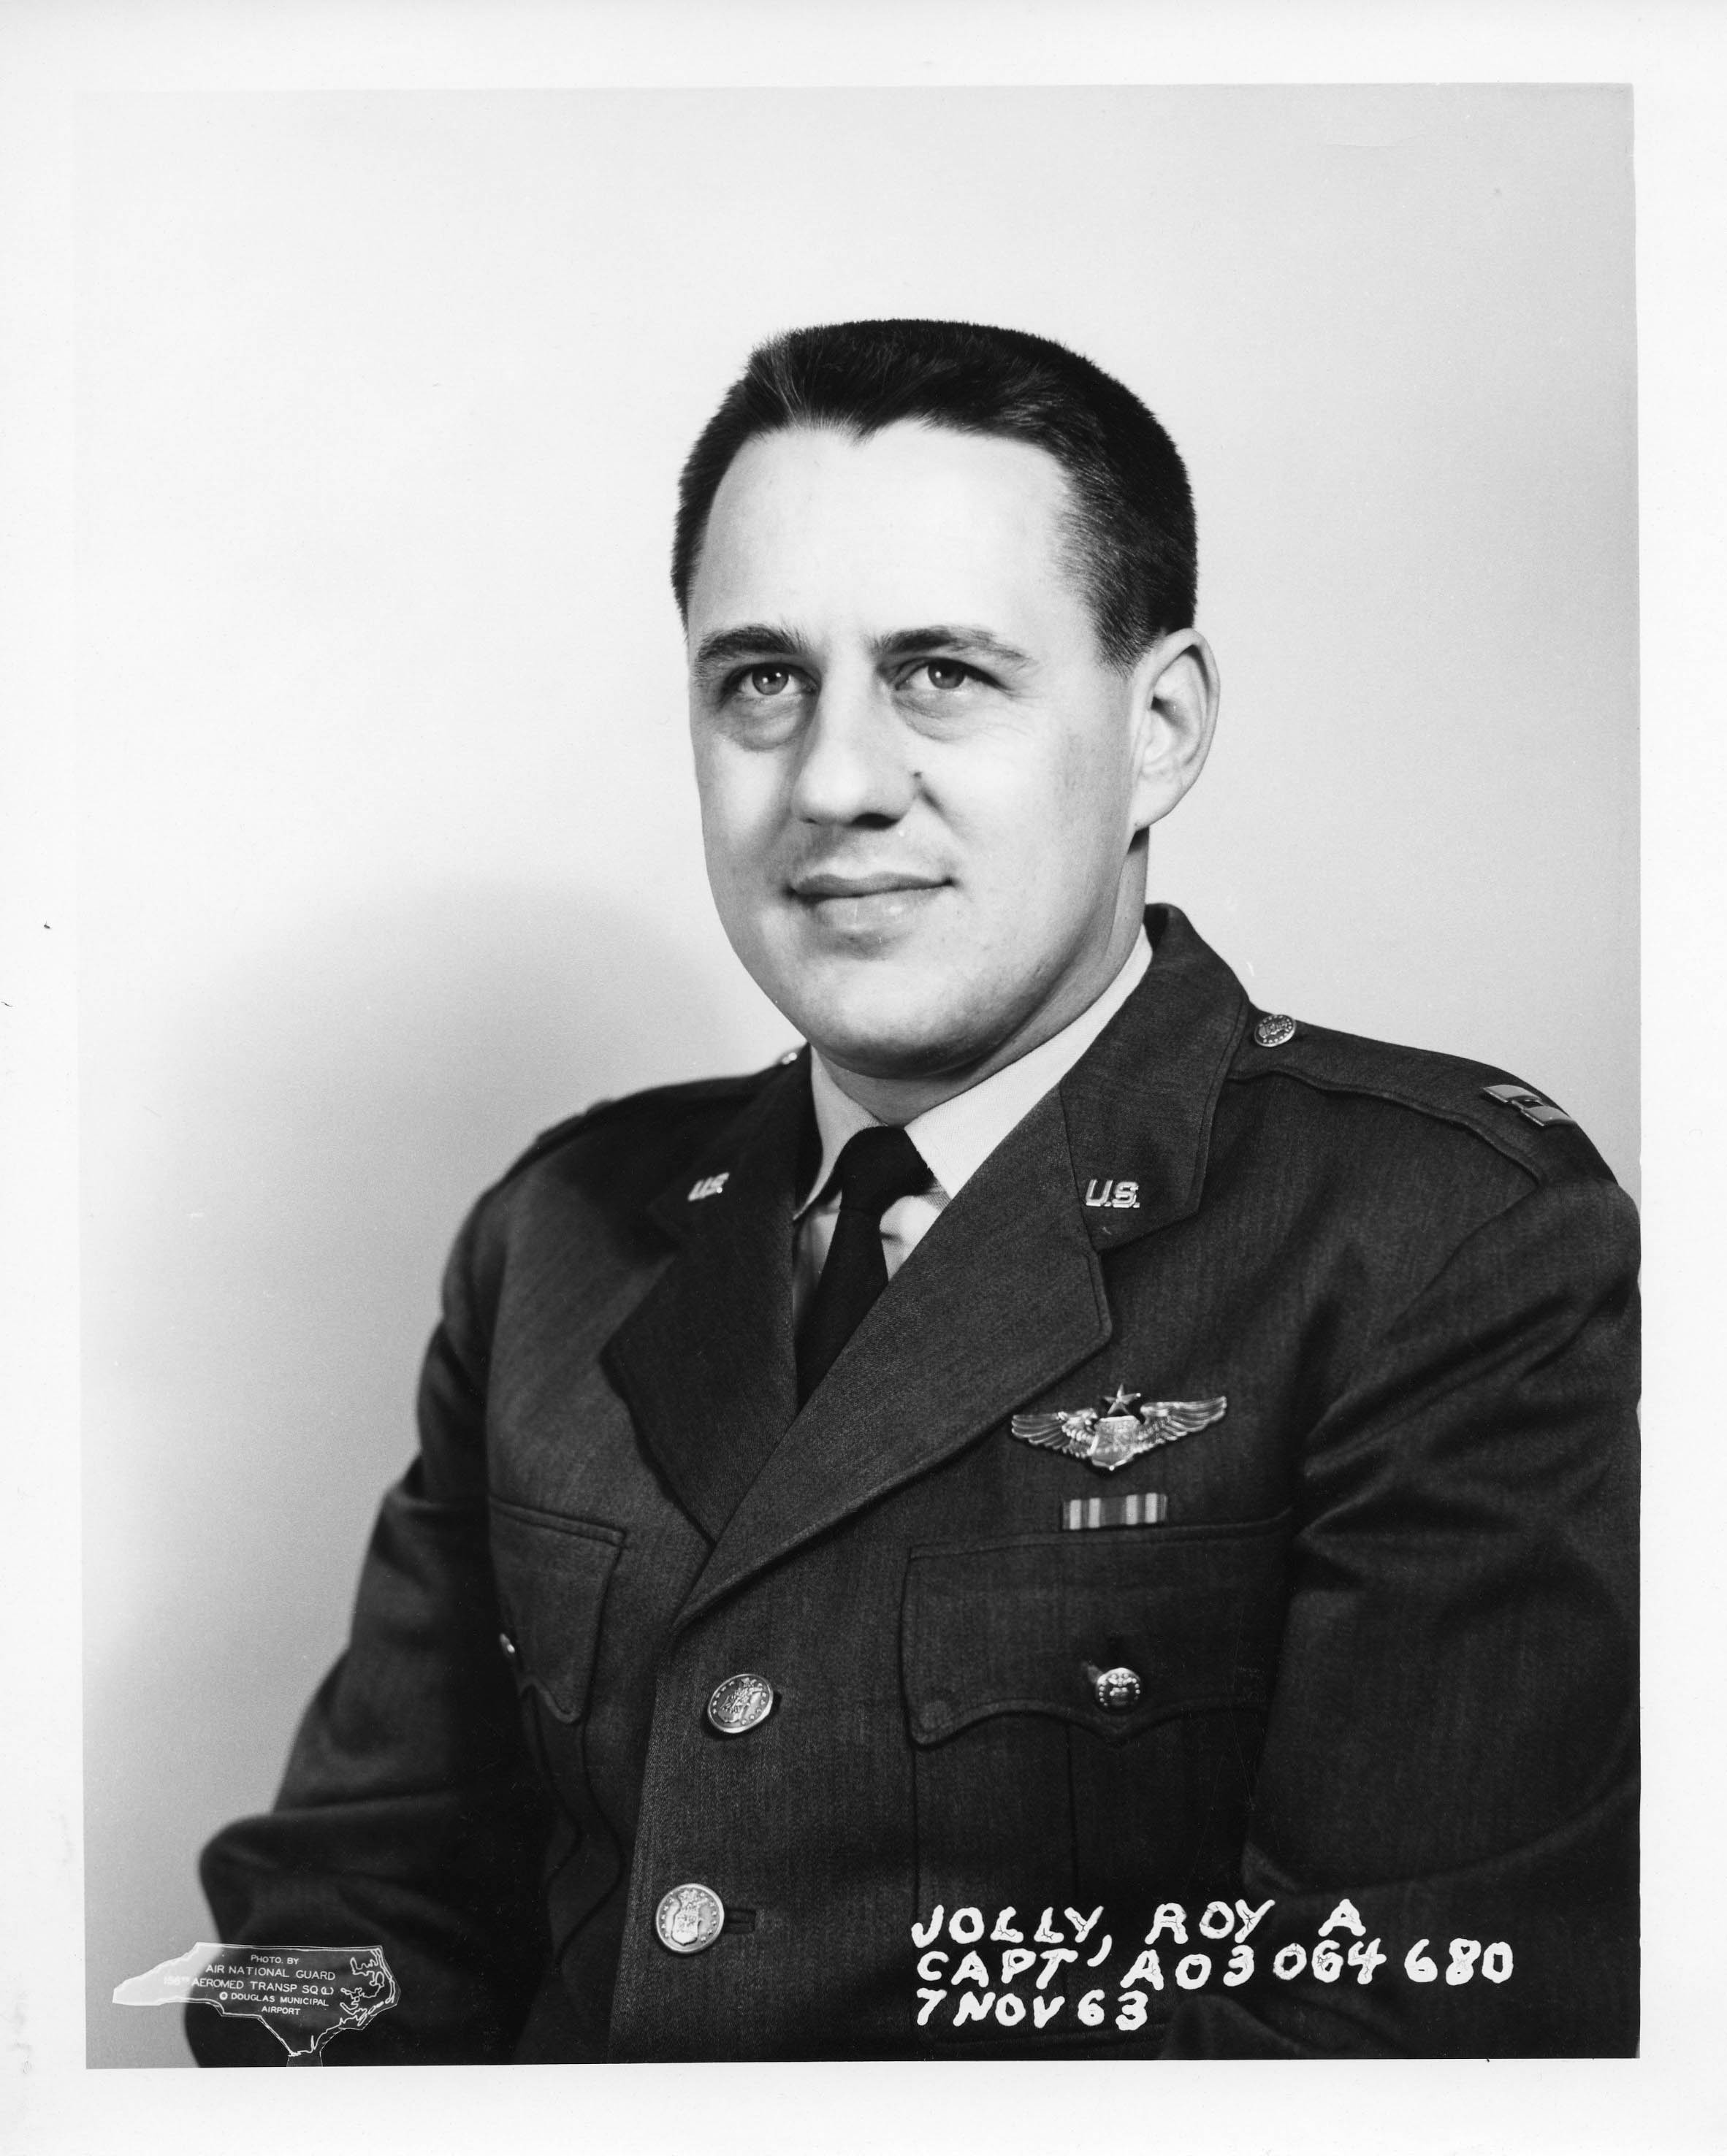 Capt Roy A. Jolly Official Photo